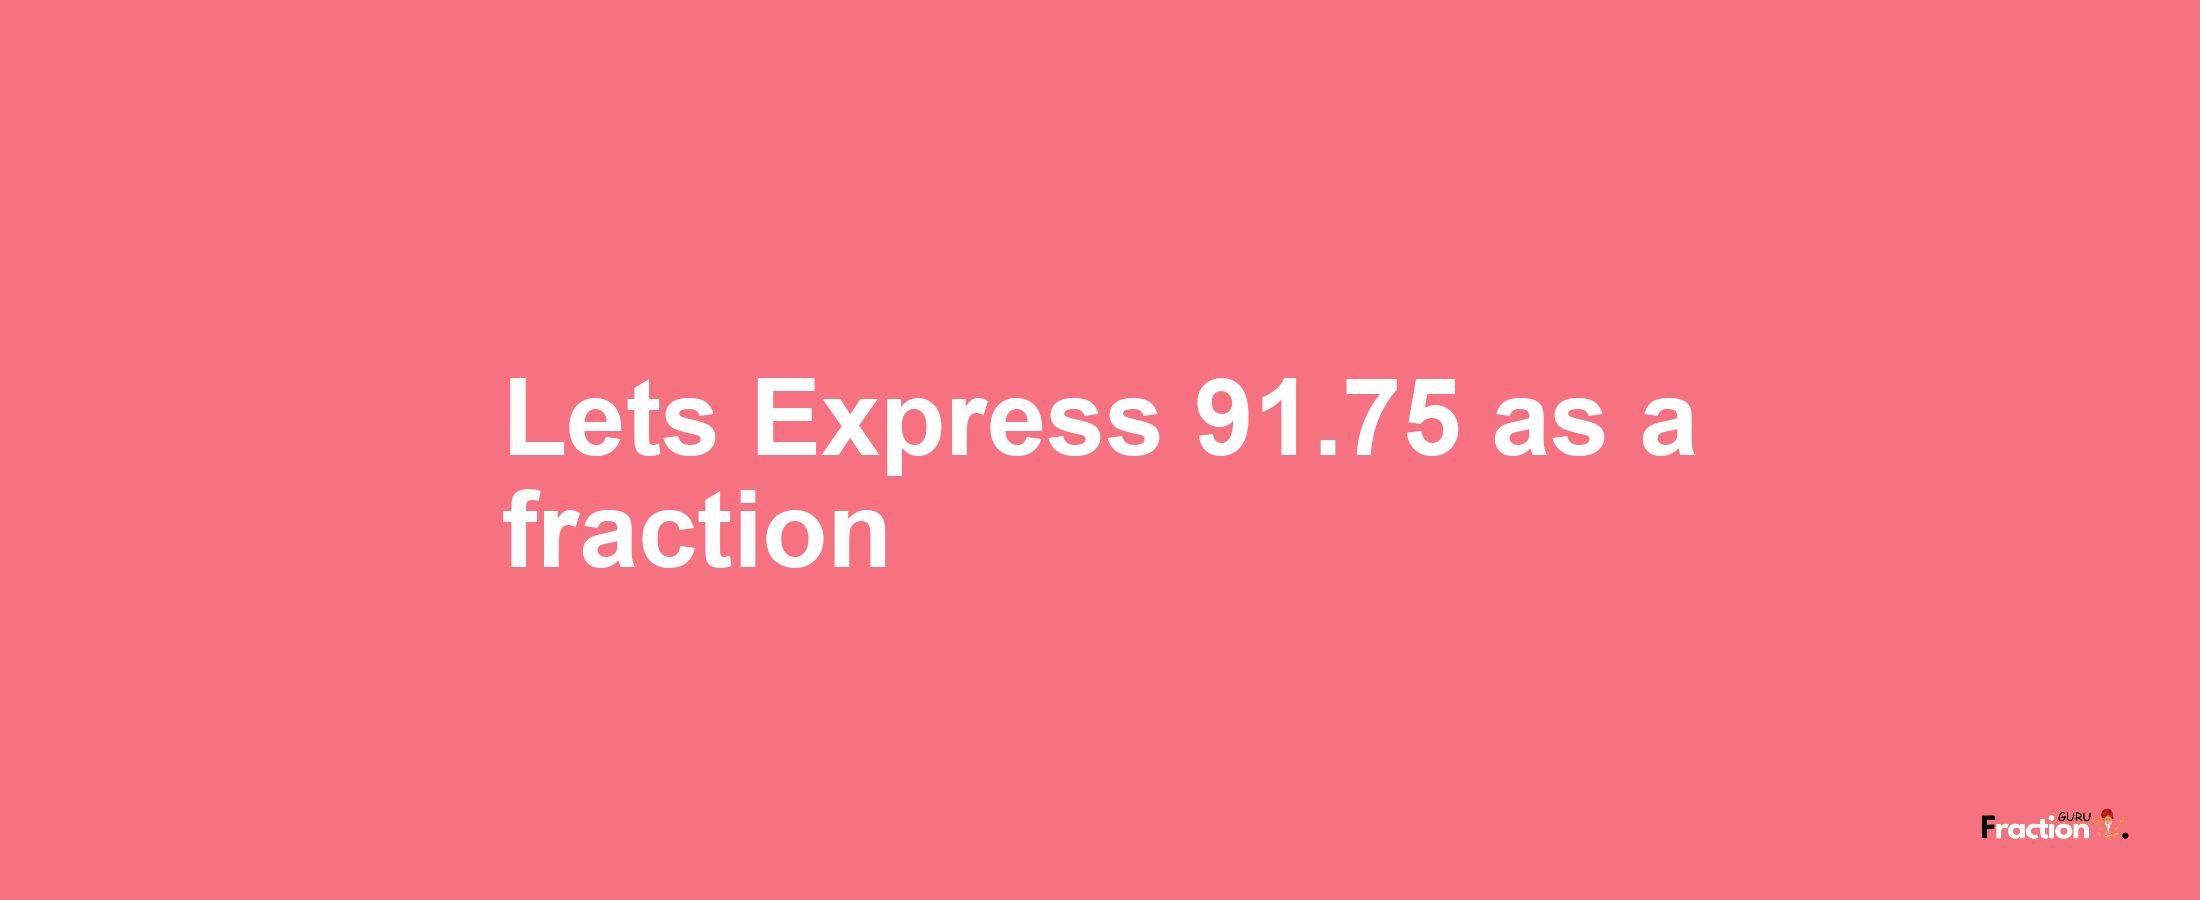 Lets Express 91.75 as afraction